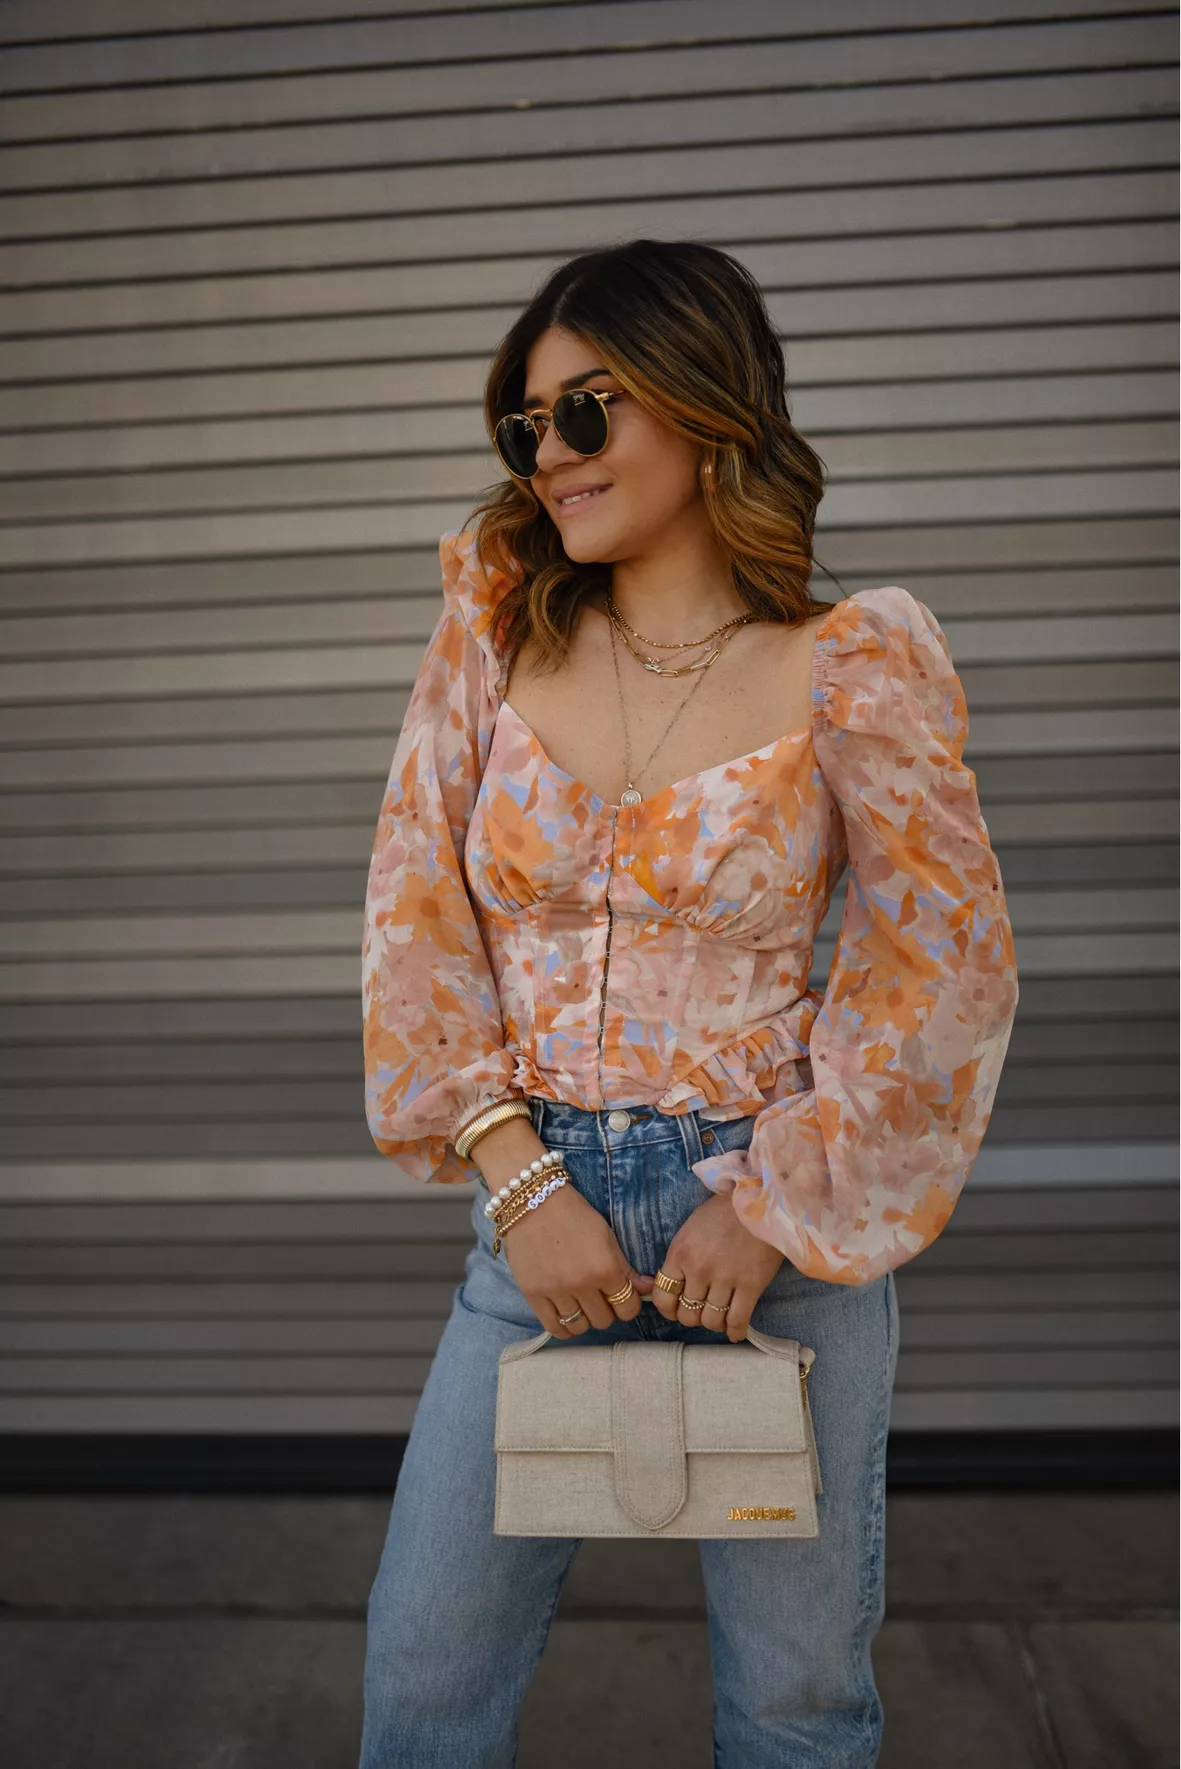 The Prettiest Floral Top for Spring